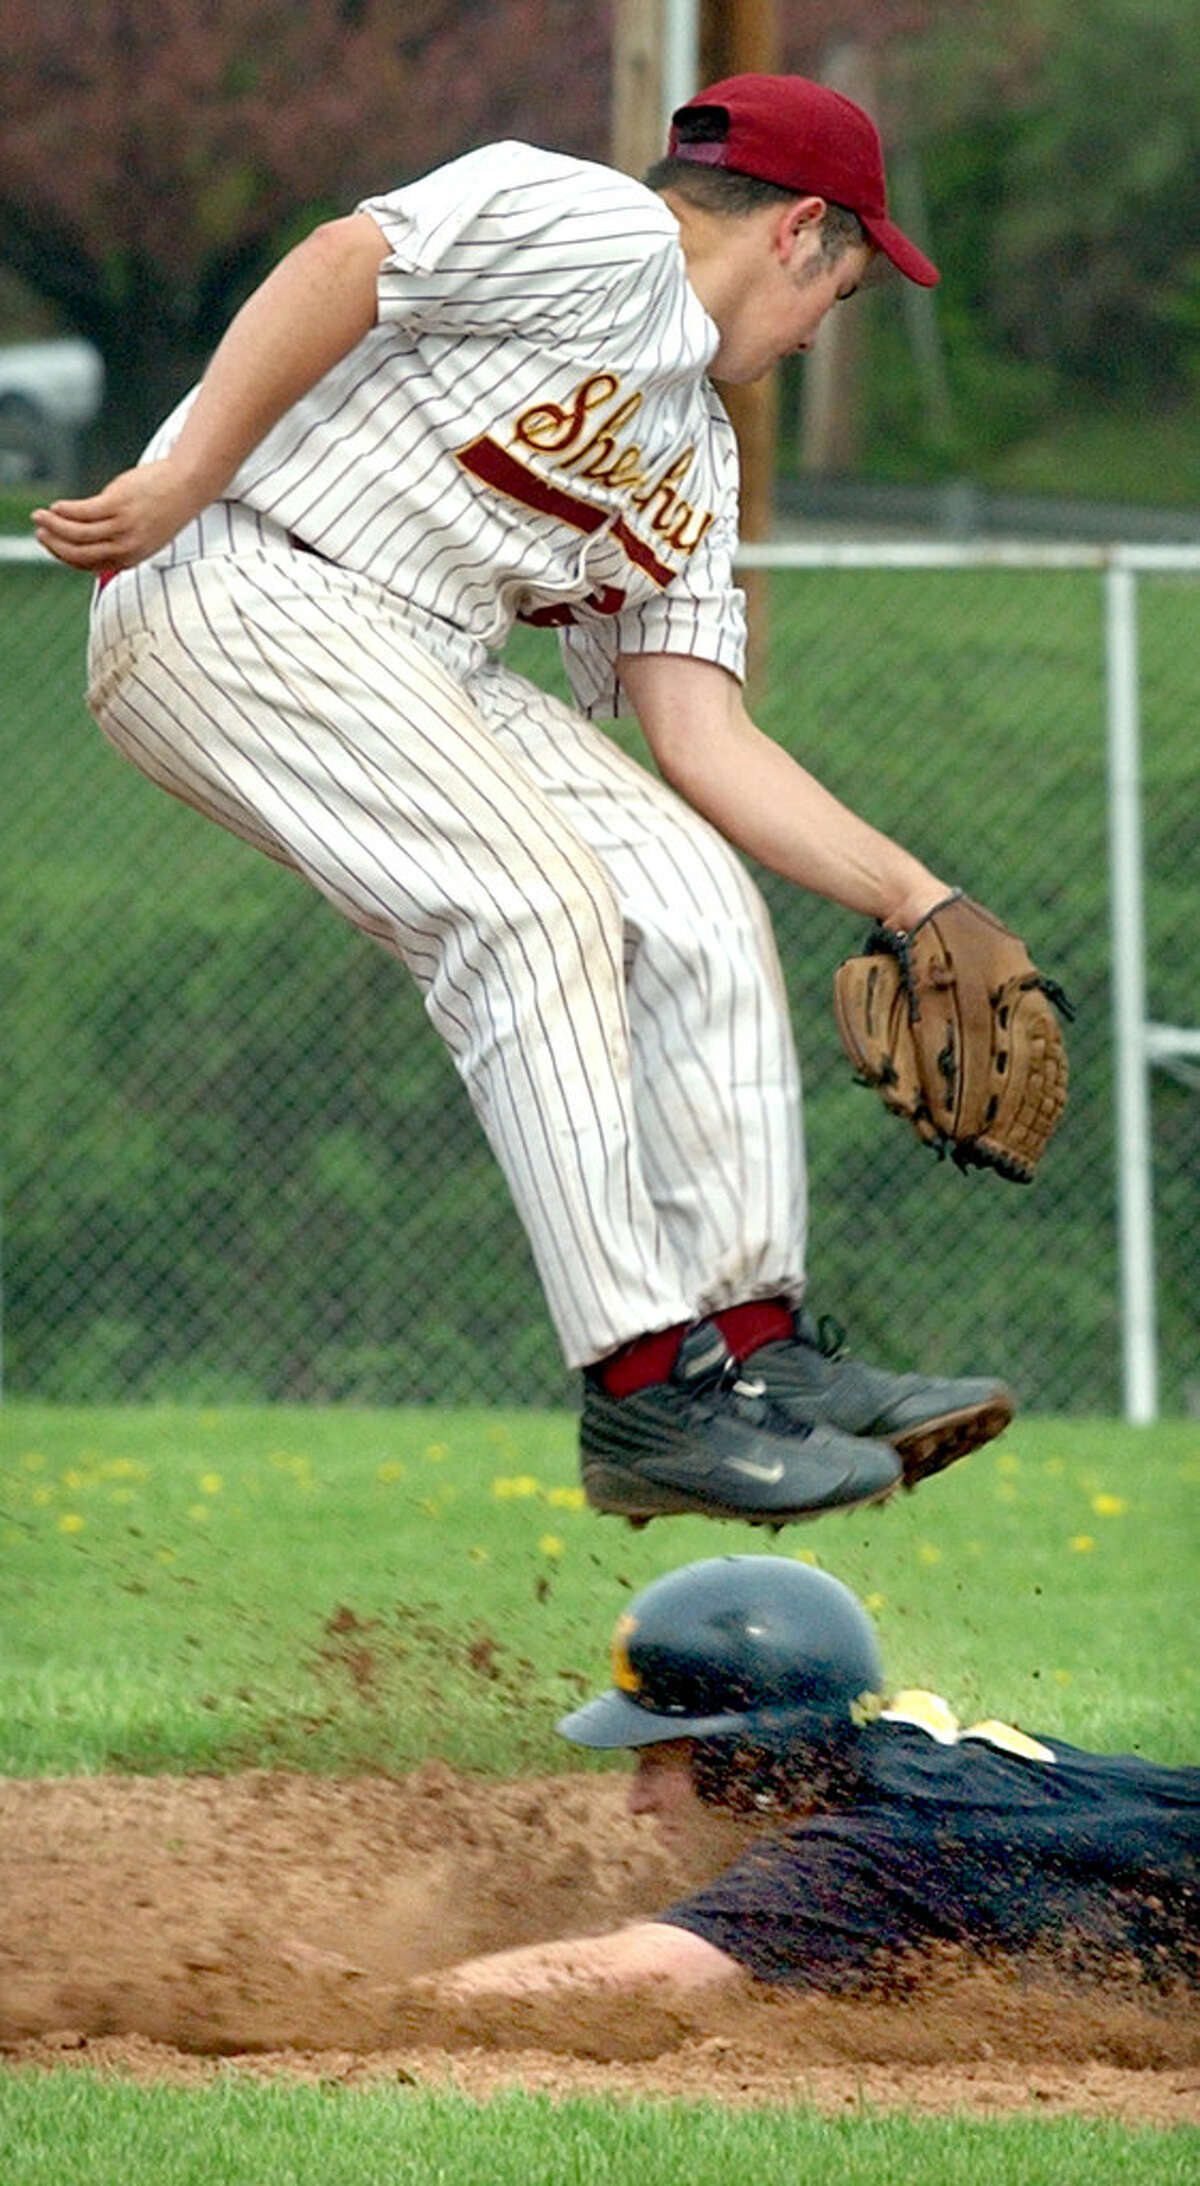 Norman Roth (bottom) of Amity steals second as Dom Lombardozzi of Sheehan gets airborne Friday in 2003. (Arnie Gold, Hearst Connecticut Media)